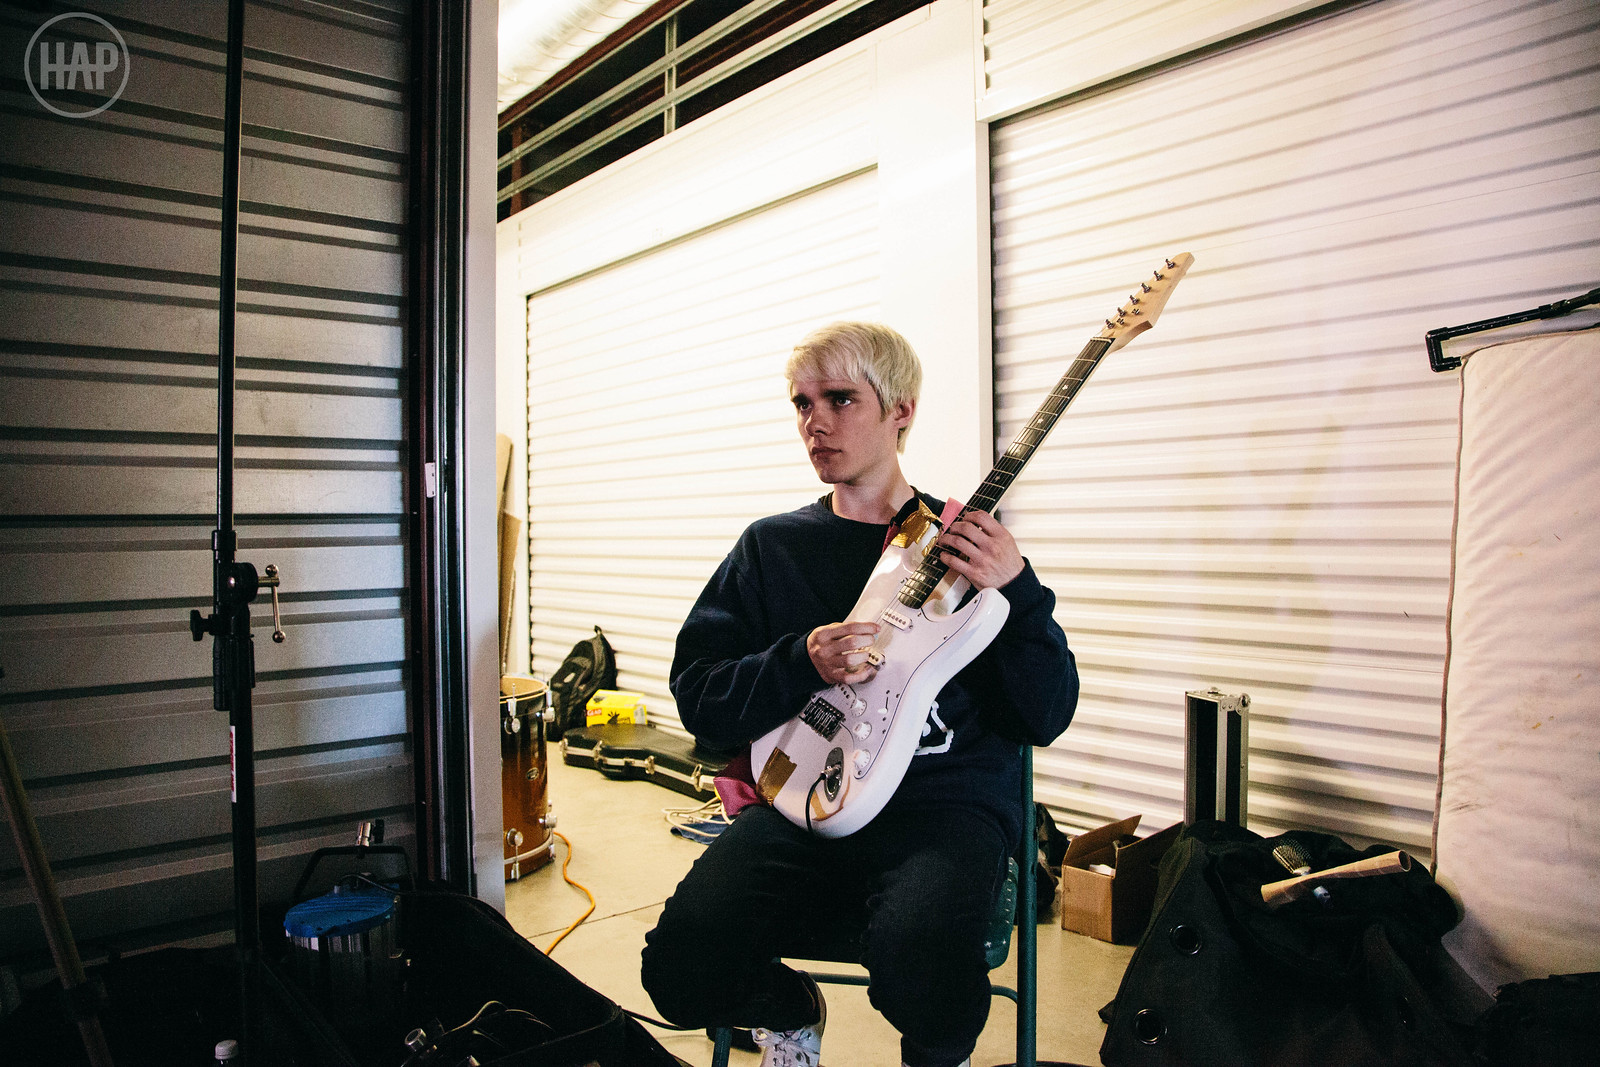 10-26-14 Awsten in I'm A Natural Blue video behind the scenes by Heather Ann Phillips on Flickr